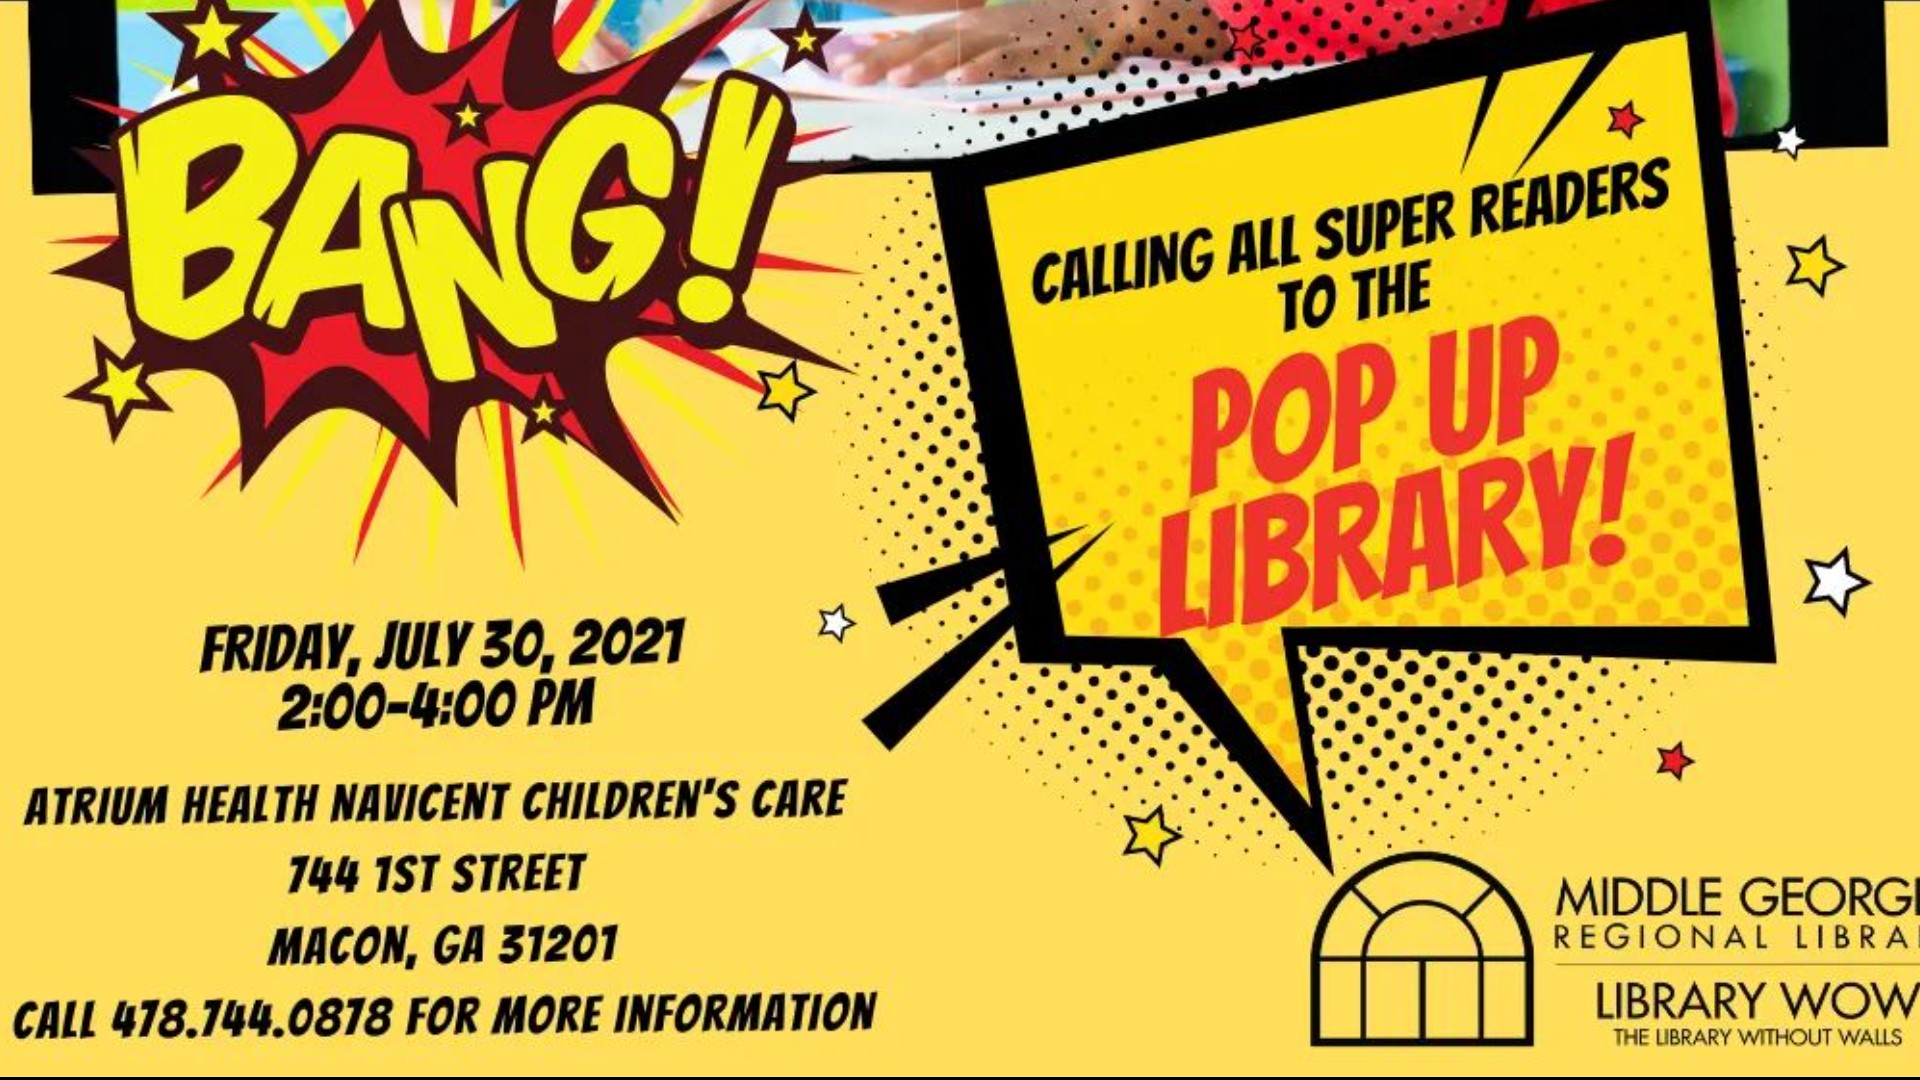 Children can check out books, sign up for library cards, and learn about upcoming events